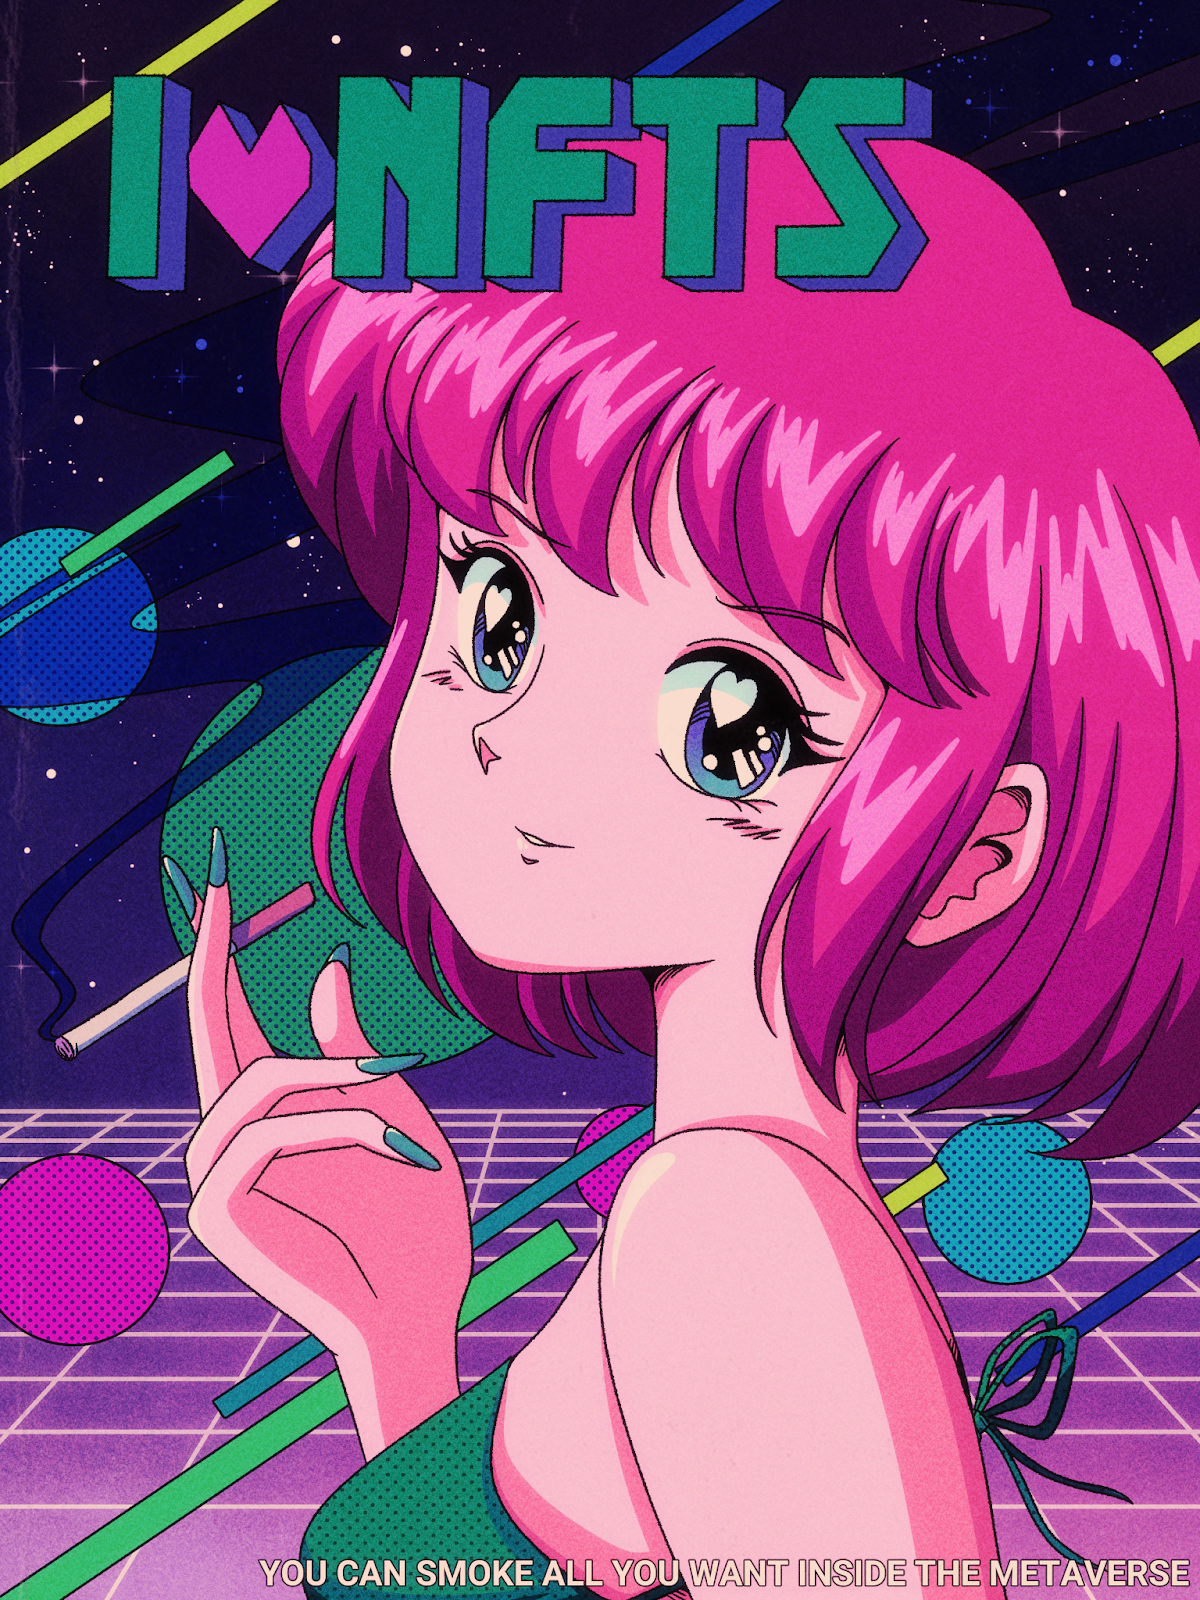 I LOVE NFTs #03 by cosplayersnft. Image source: https://foundation.app/@cosplayersNFT